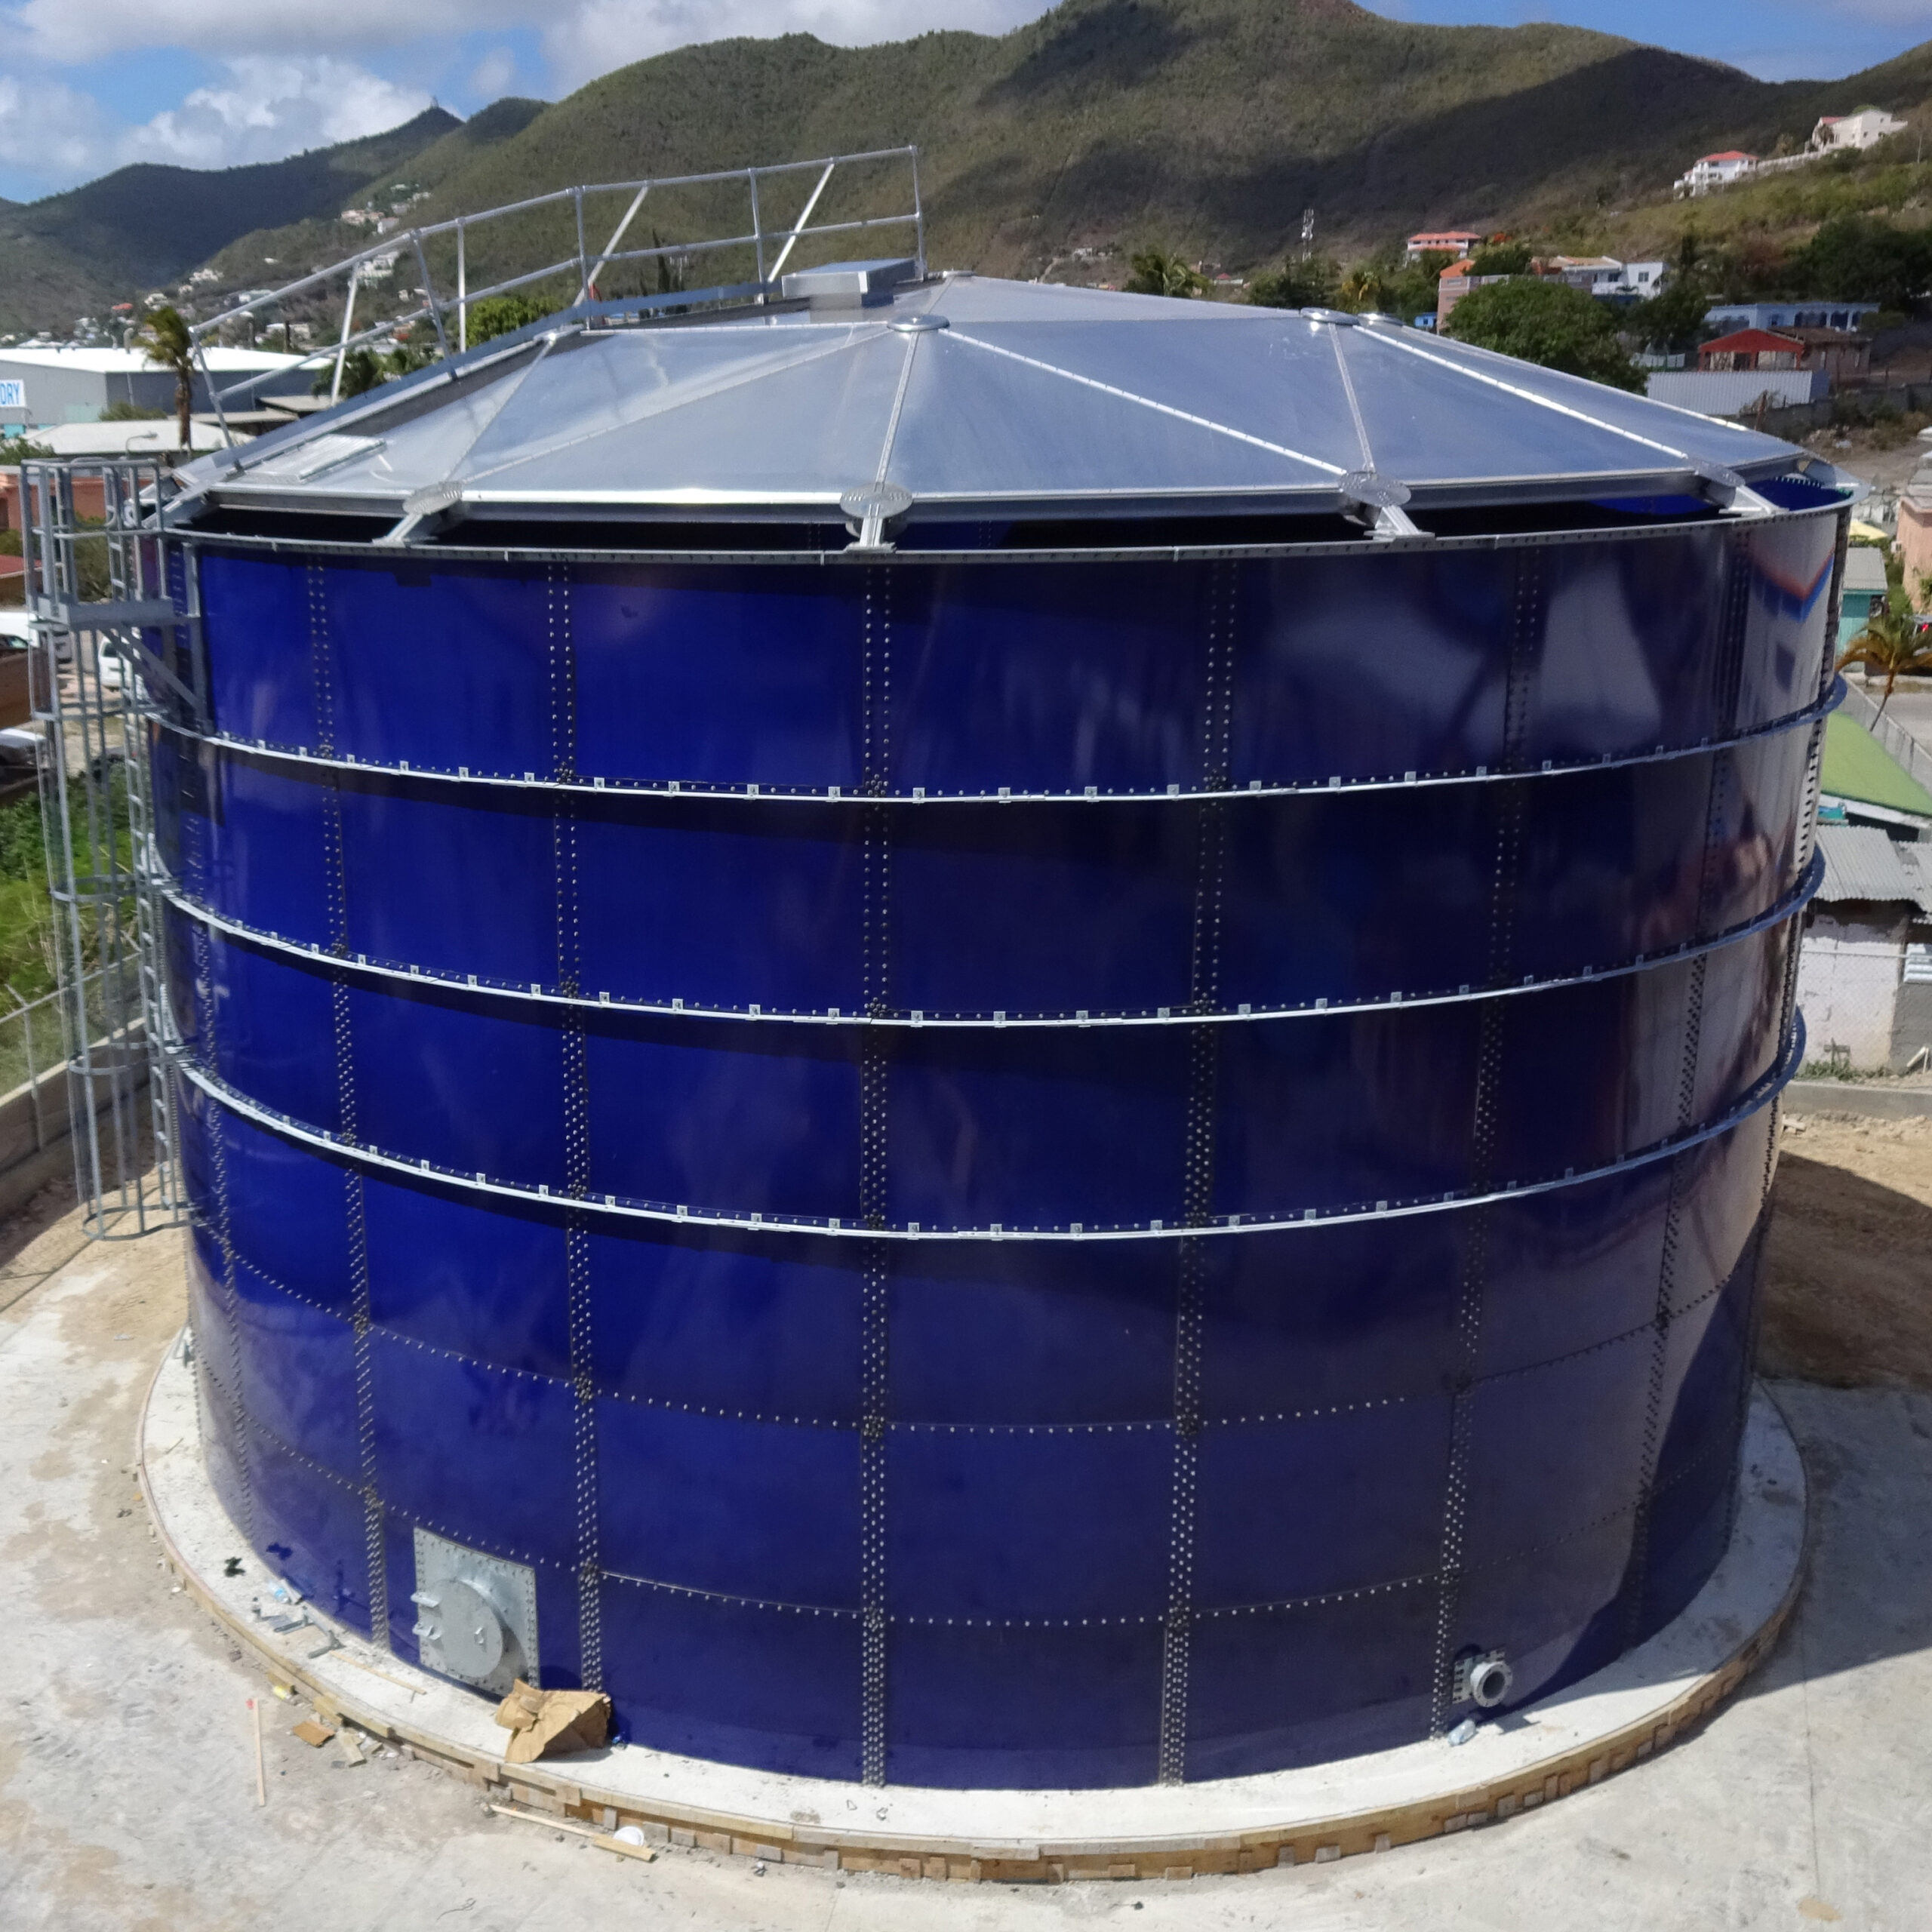 UIG Bolted Water Storage Tanks for Remote Island Locations